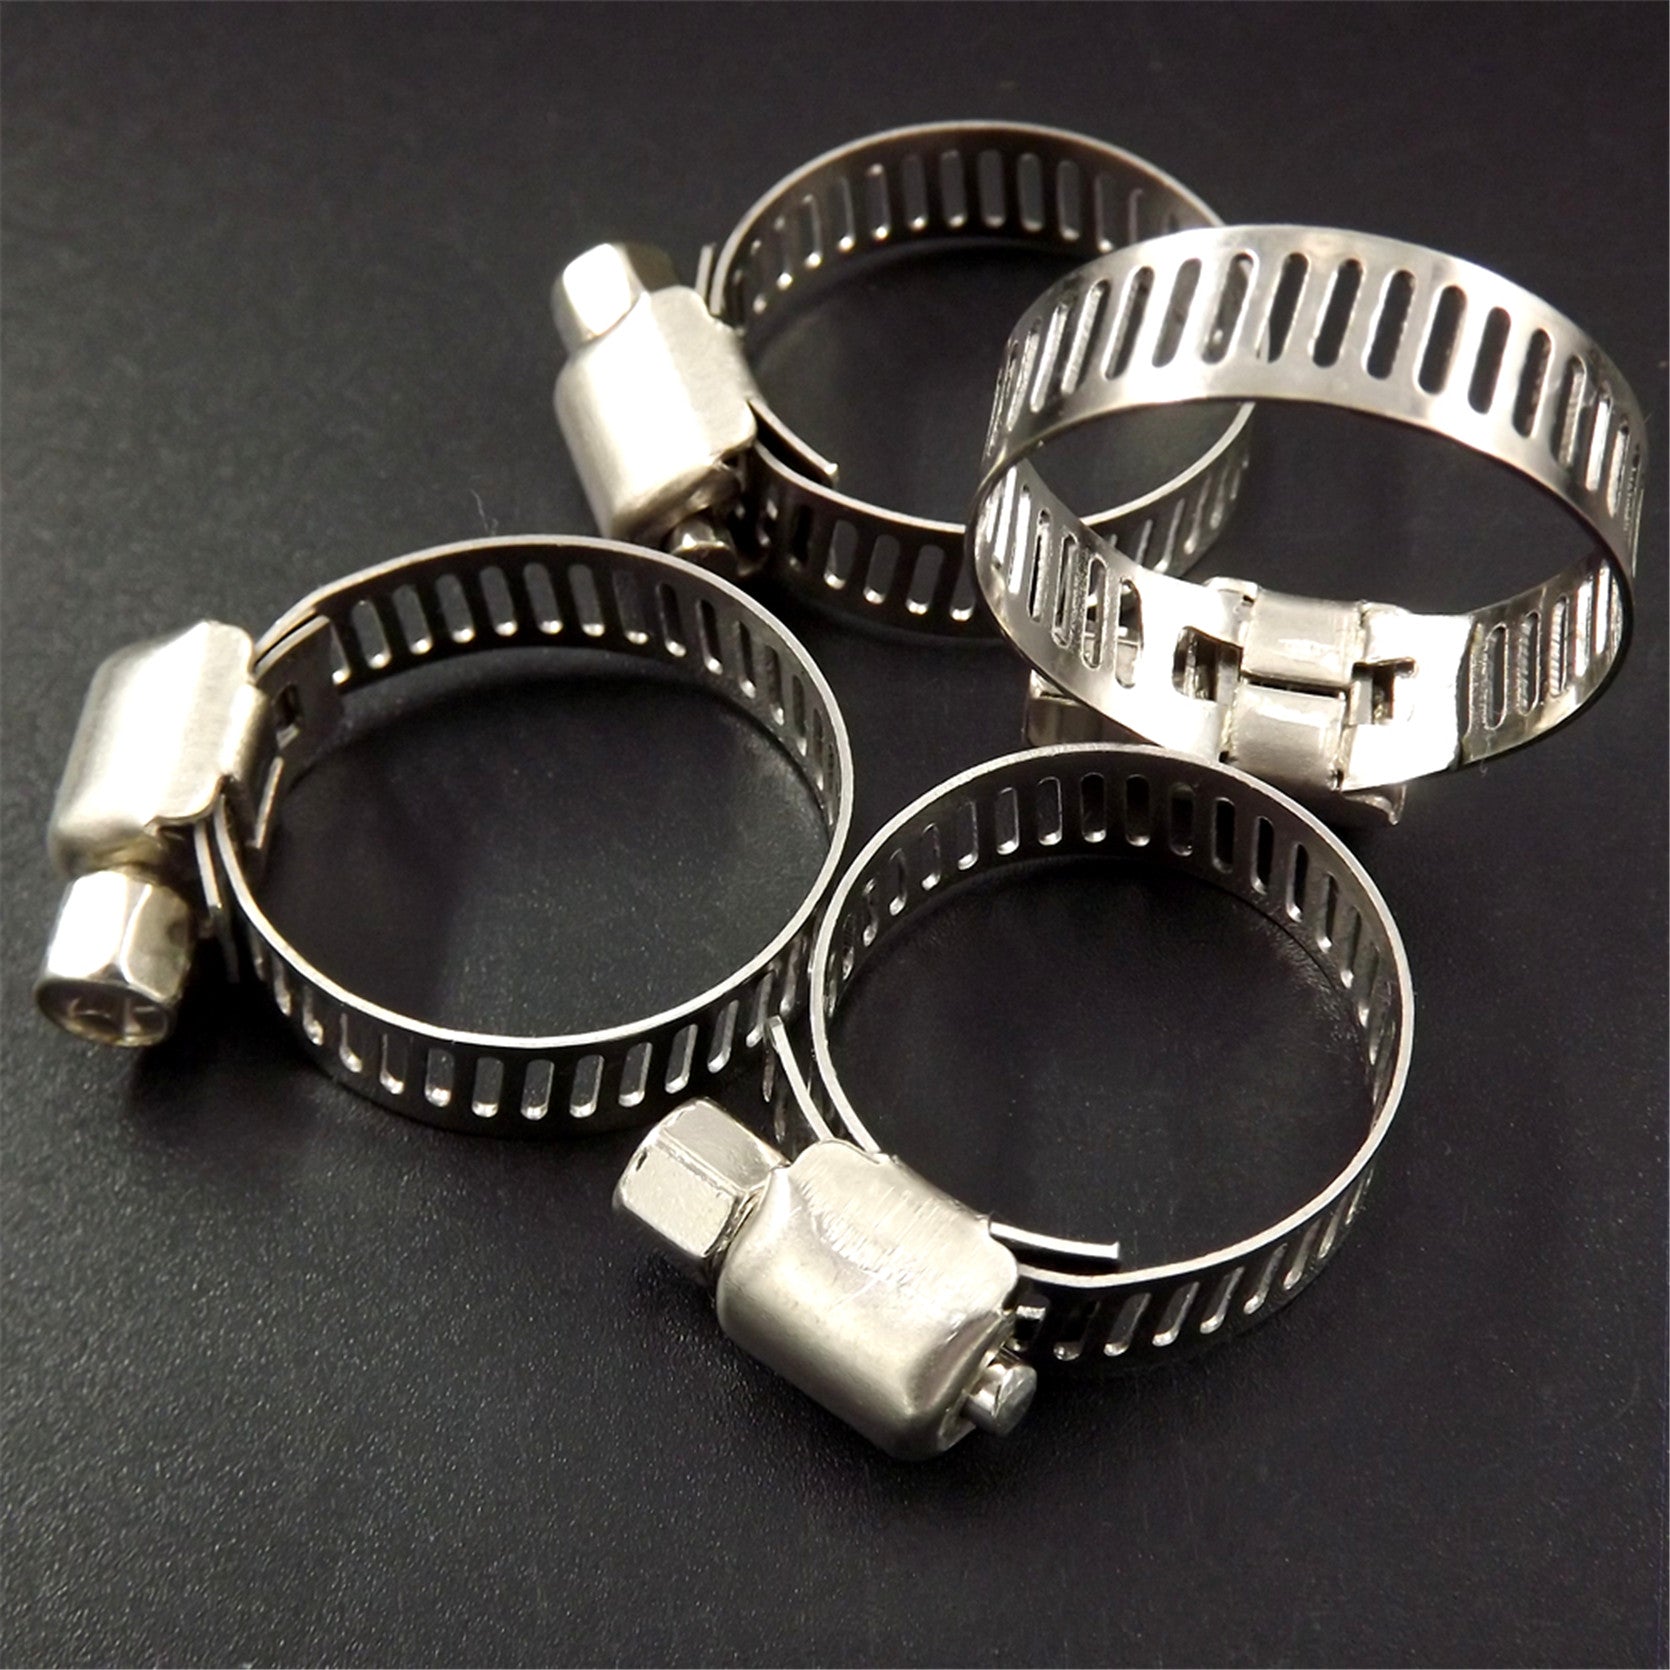 15 Pcs 3/8"-1/2" Stainless Steel Drive Hose Clamps Fuel Line Worm Clips (8-12mm) FINDMALLPARTS